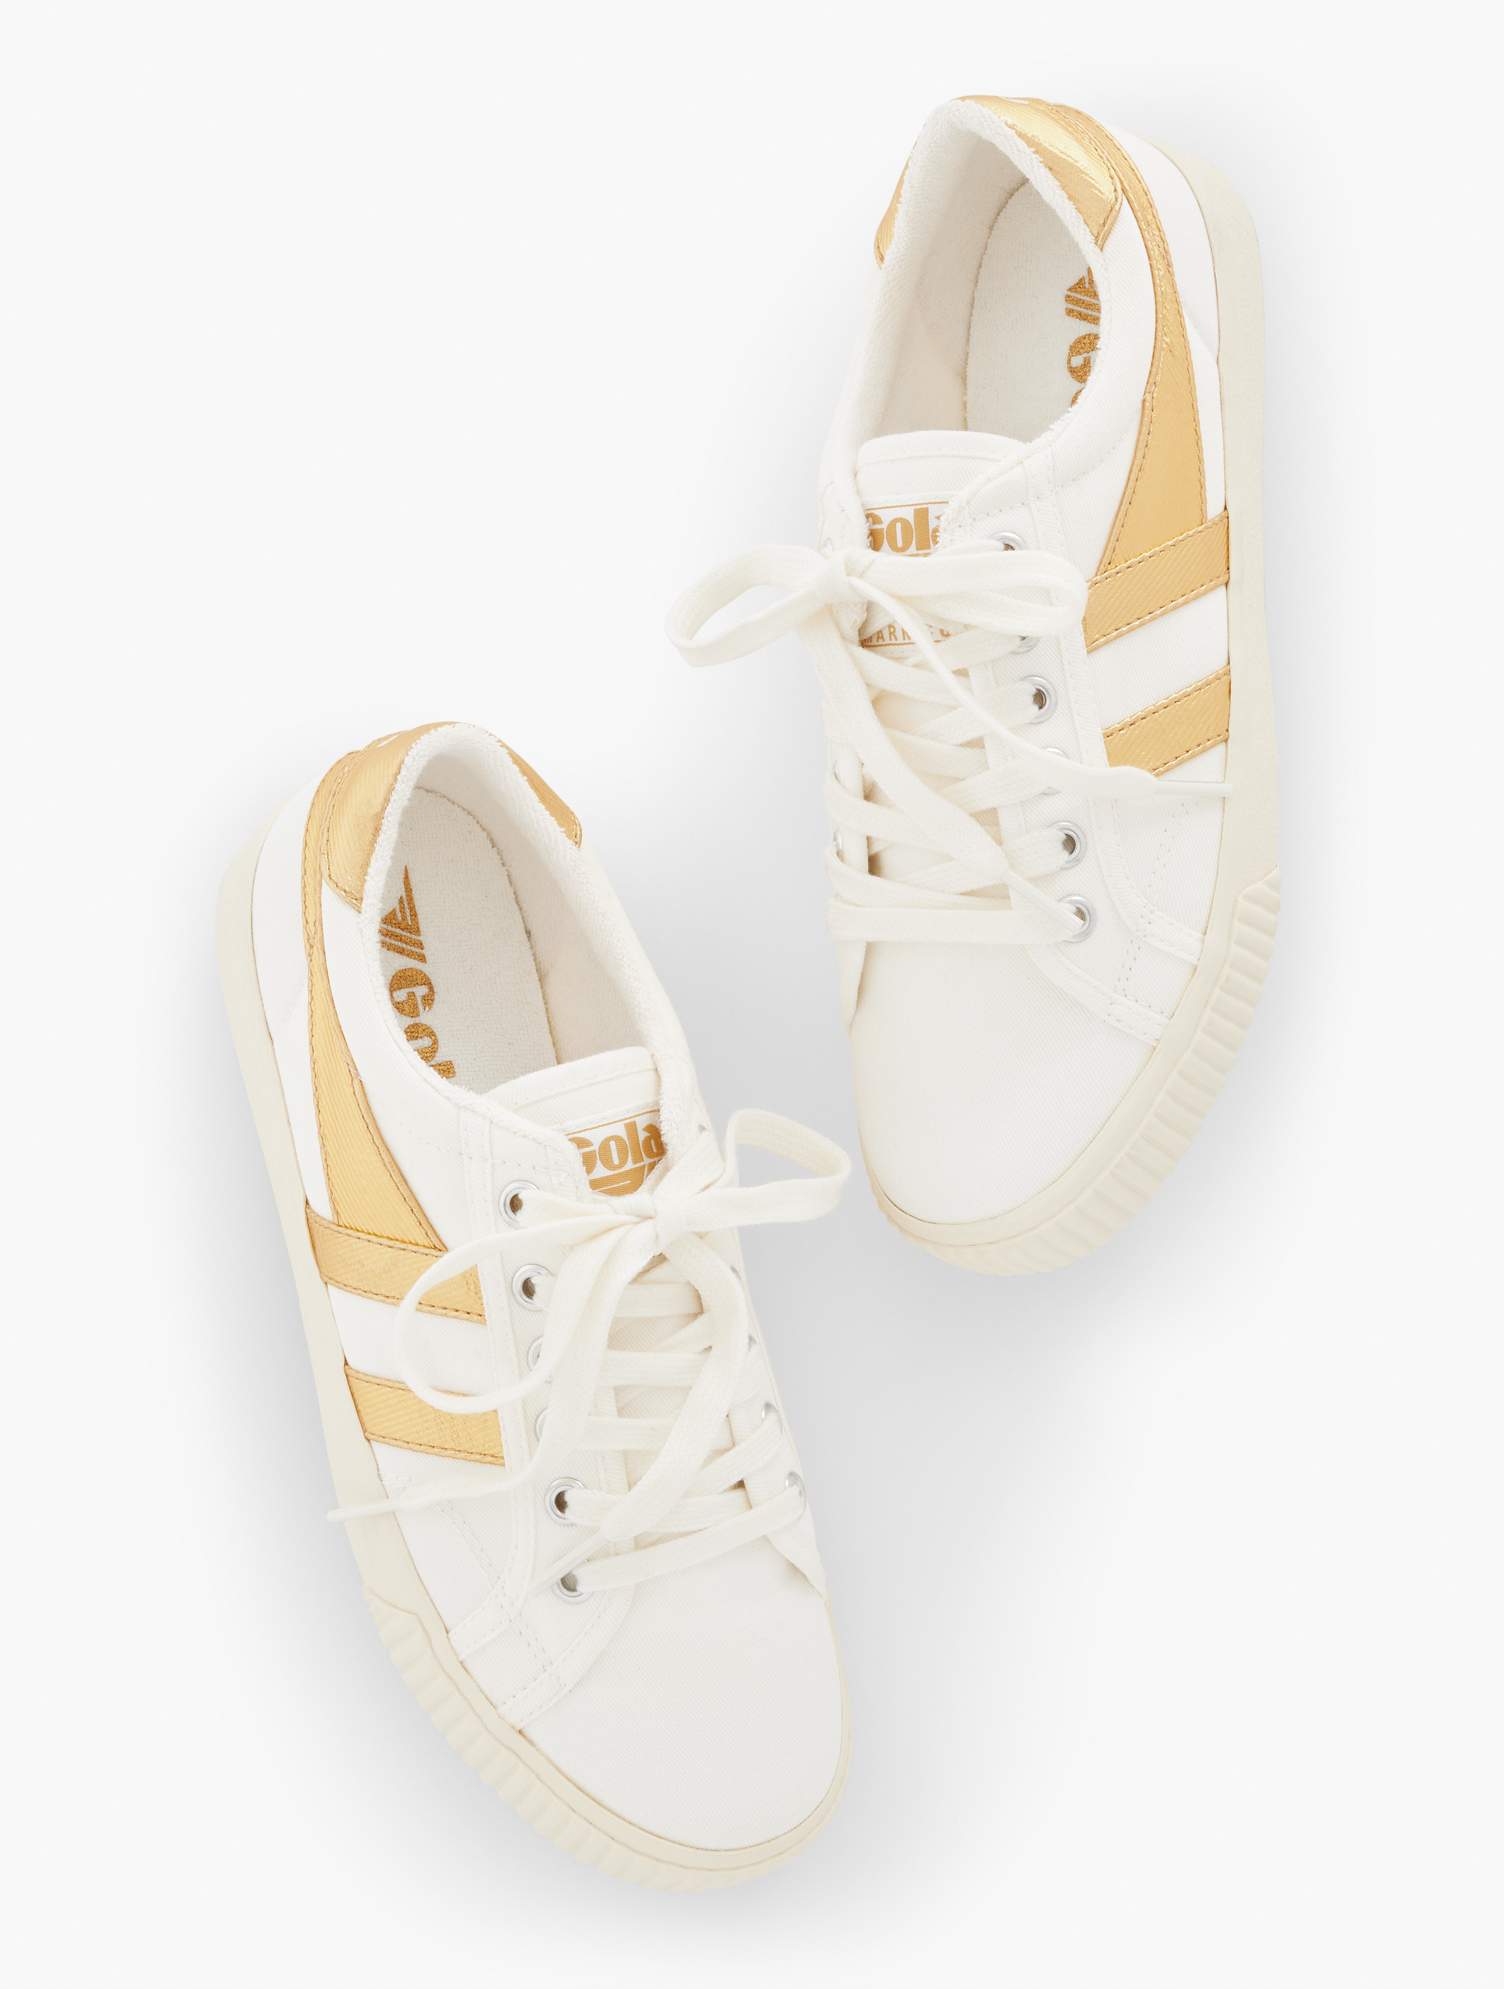 Talbots Â® Mark Cox Tennis Sneakers - Metallic - Off White/gold - 8 1/2 M - 100% Cotton  In Off White,gold